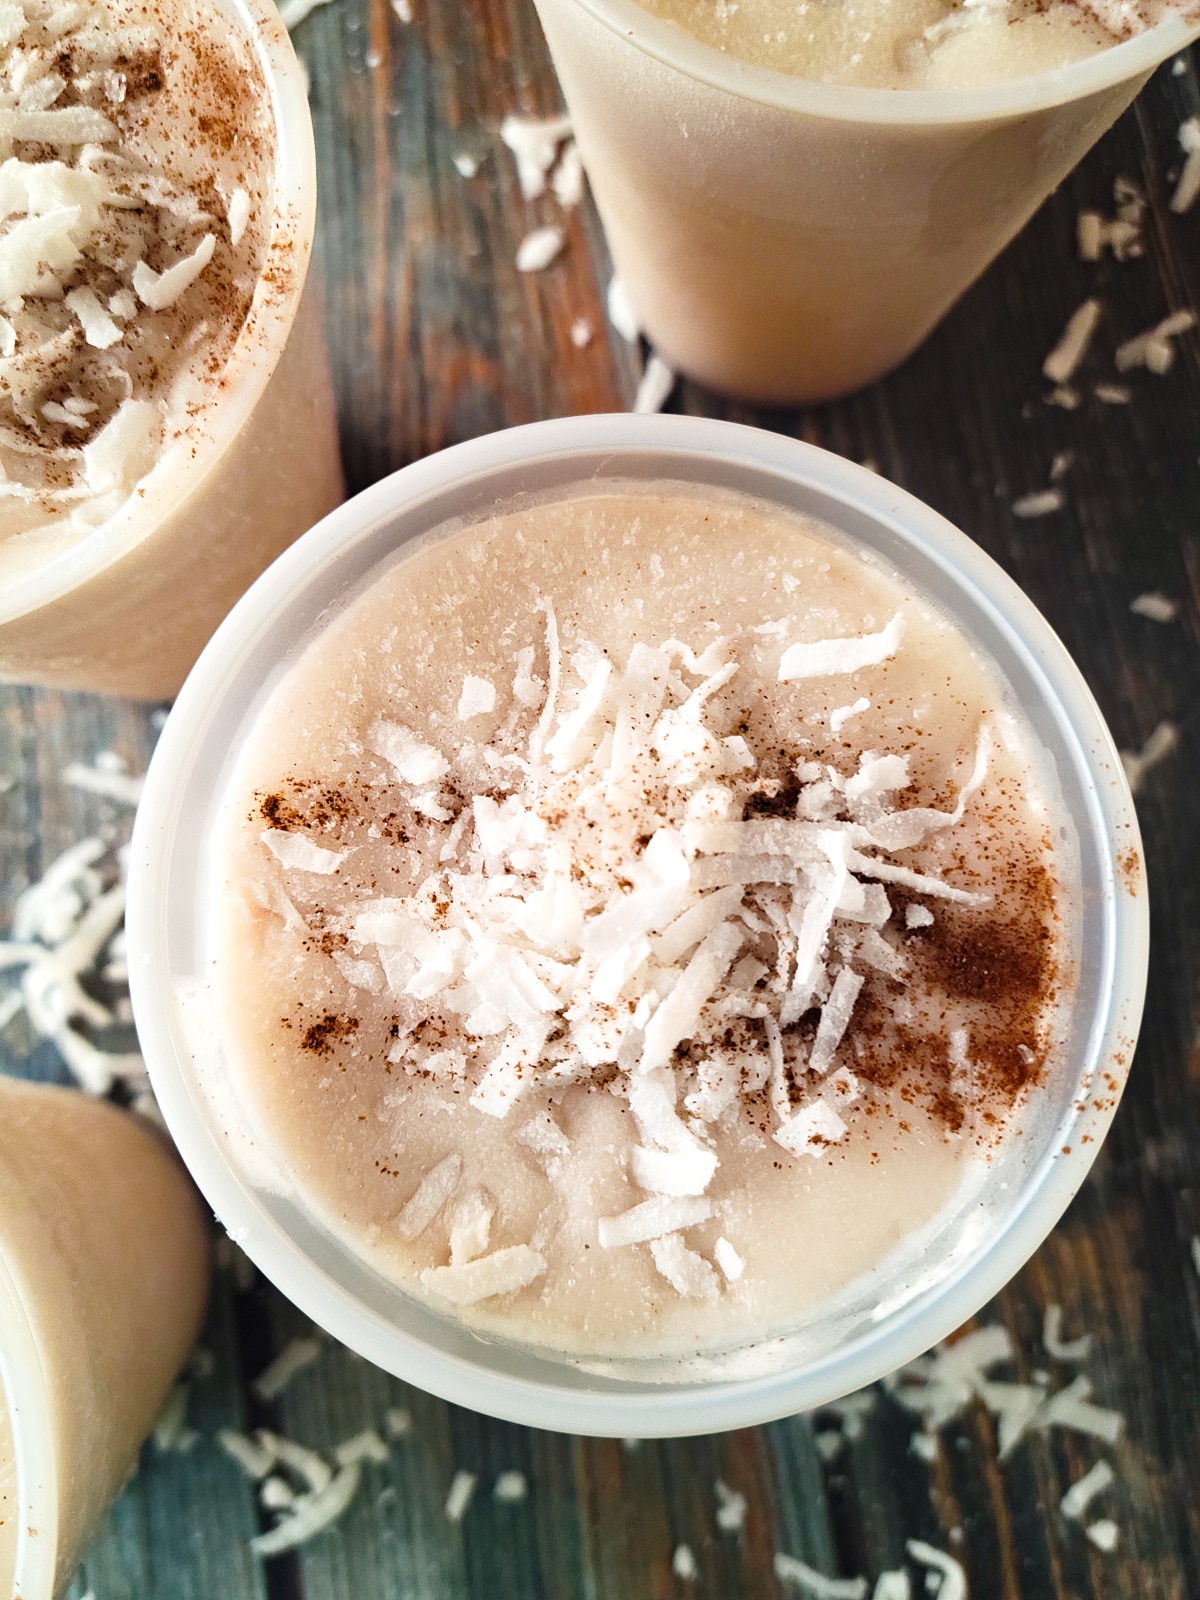 Limber de Coco (Coconut Limber) prepared and frozen in plastic cups, topped with shredded coconut and ground cinnamon.